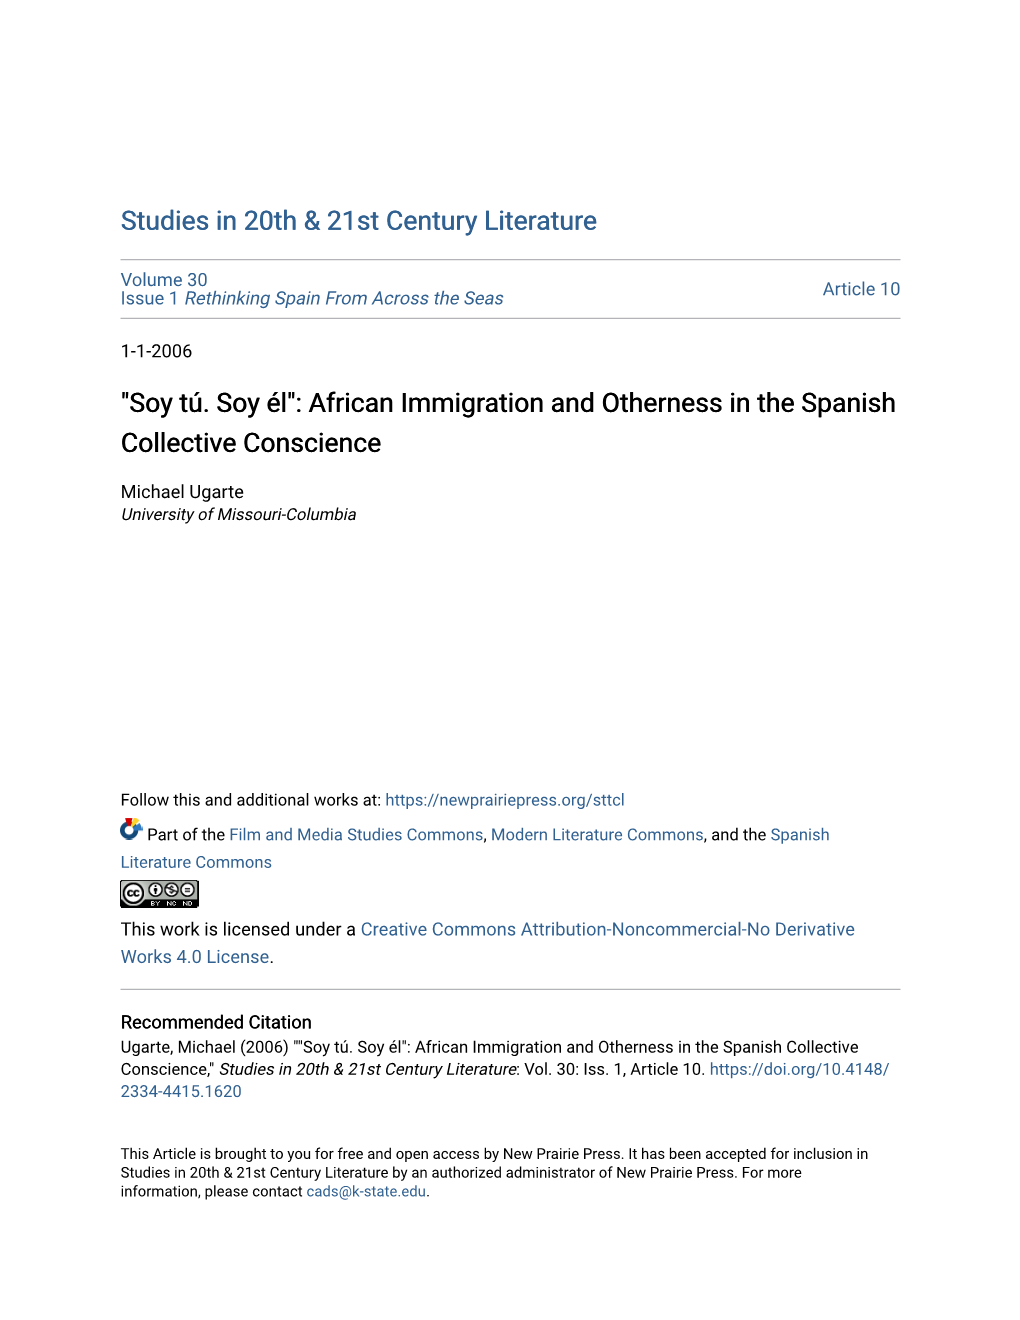 African Immigration and Otherness in the Spanish Collective Conscience